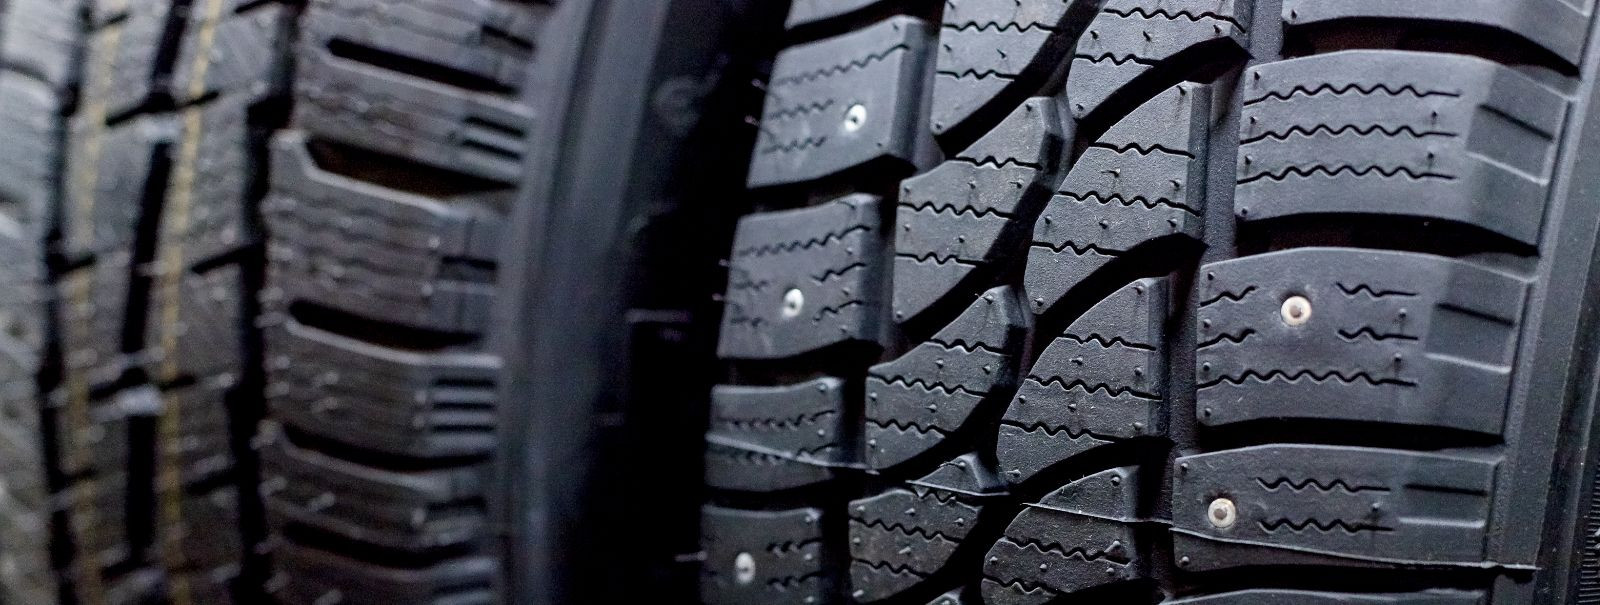 Before diving into the specifics of summer and winter tyres, it's essential to grasp the fundamental role tyres play in vehicle safety and performance. Tyres ar